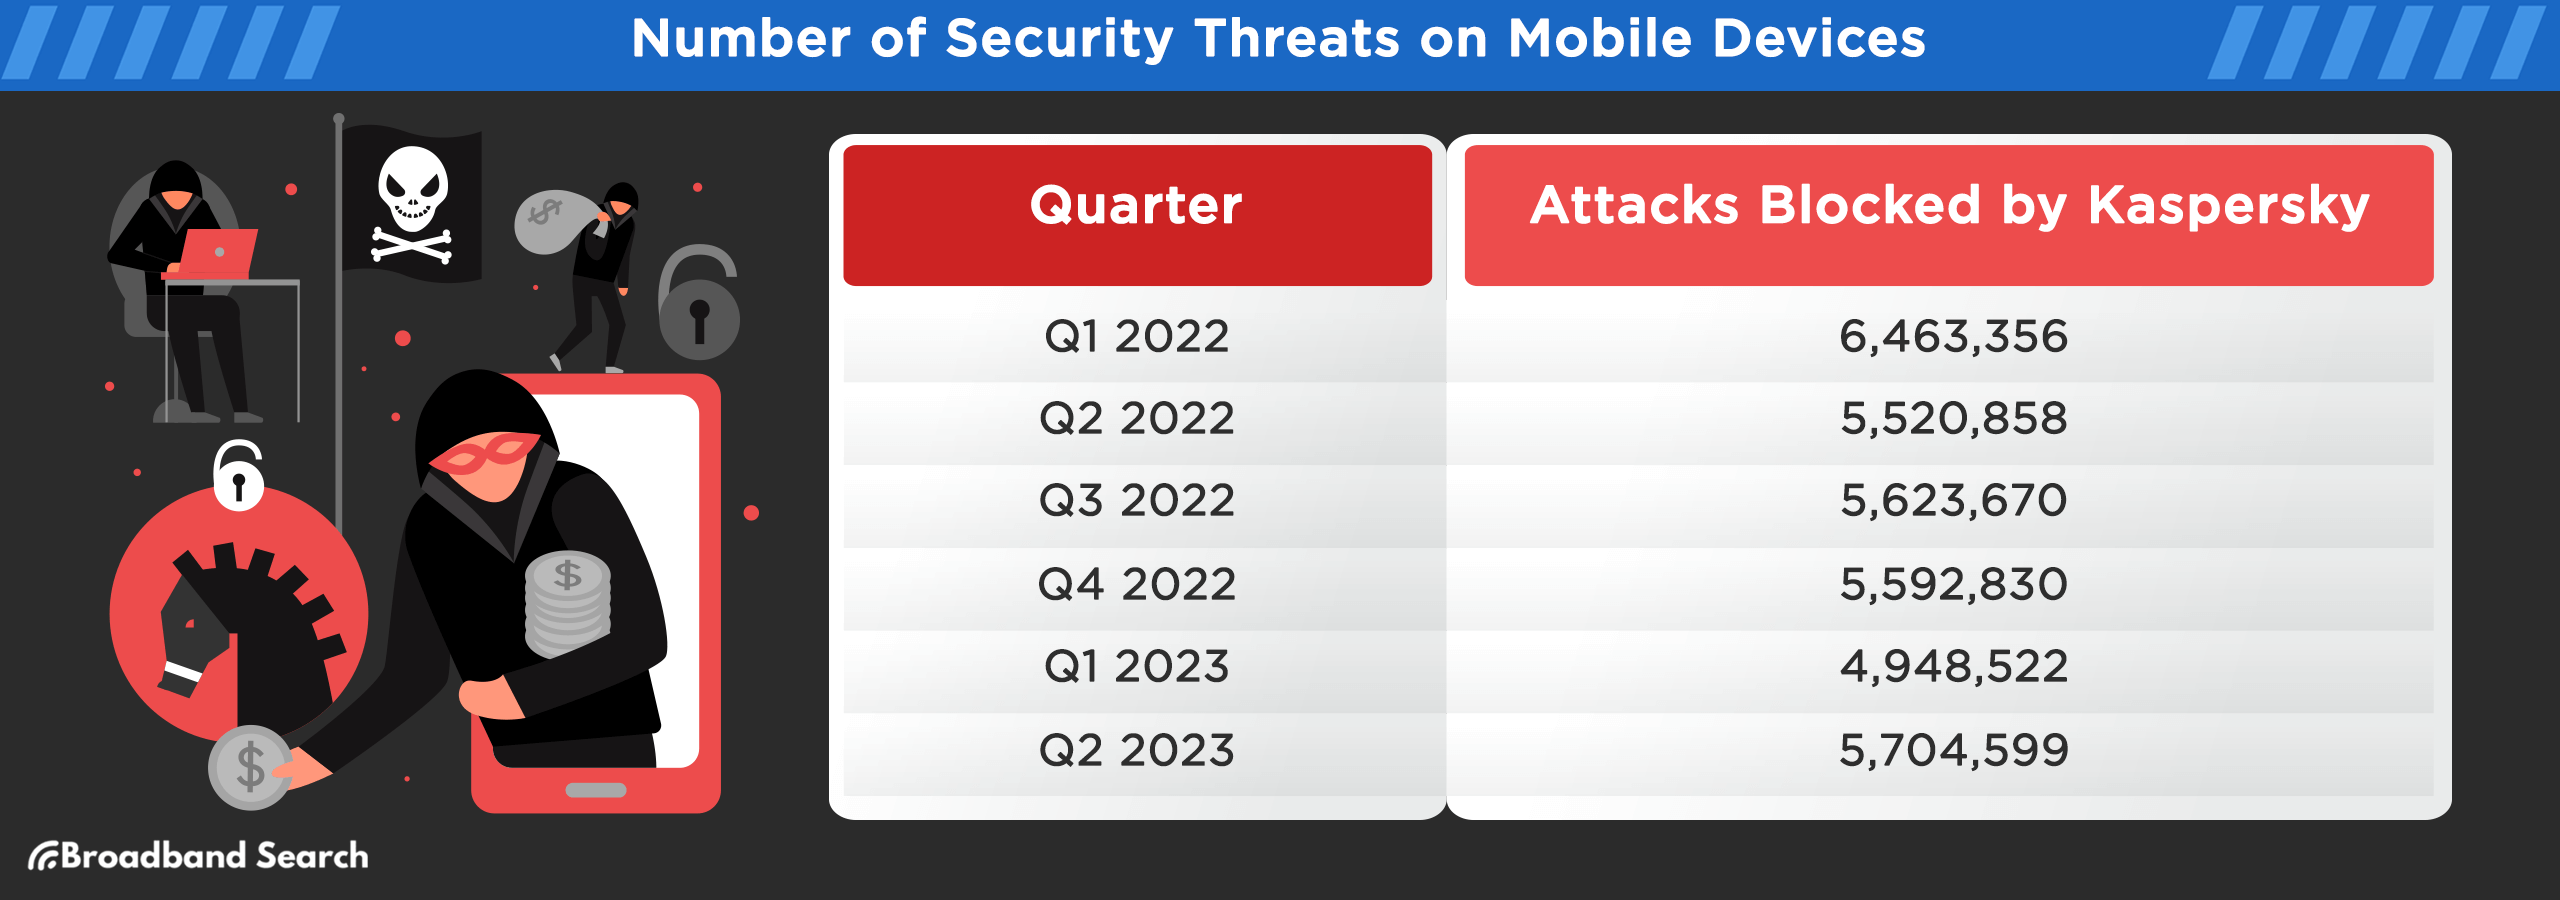 Number of Security threats on mobile devices per quarter from 2022 to 2023 and the number of attacks blocked by kaspersky